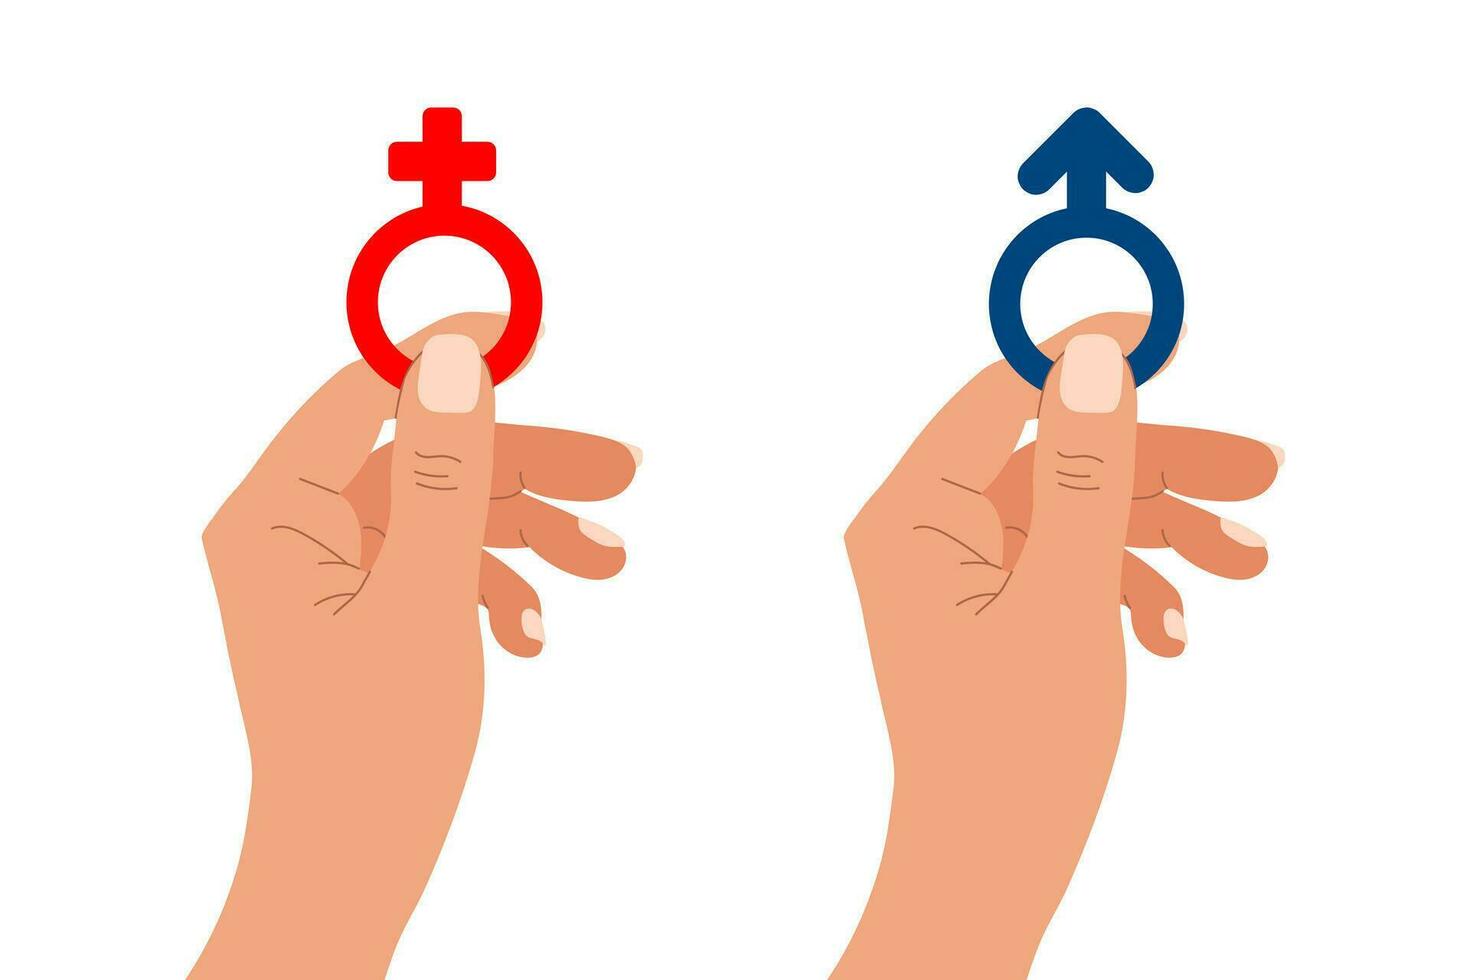 The hand holds the female and male symbols. Gender signs of woman and man in hand. Illustration, vector